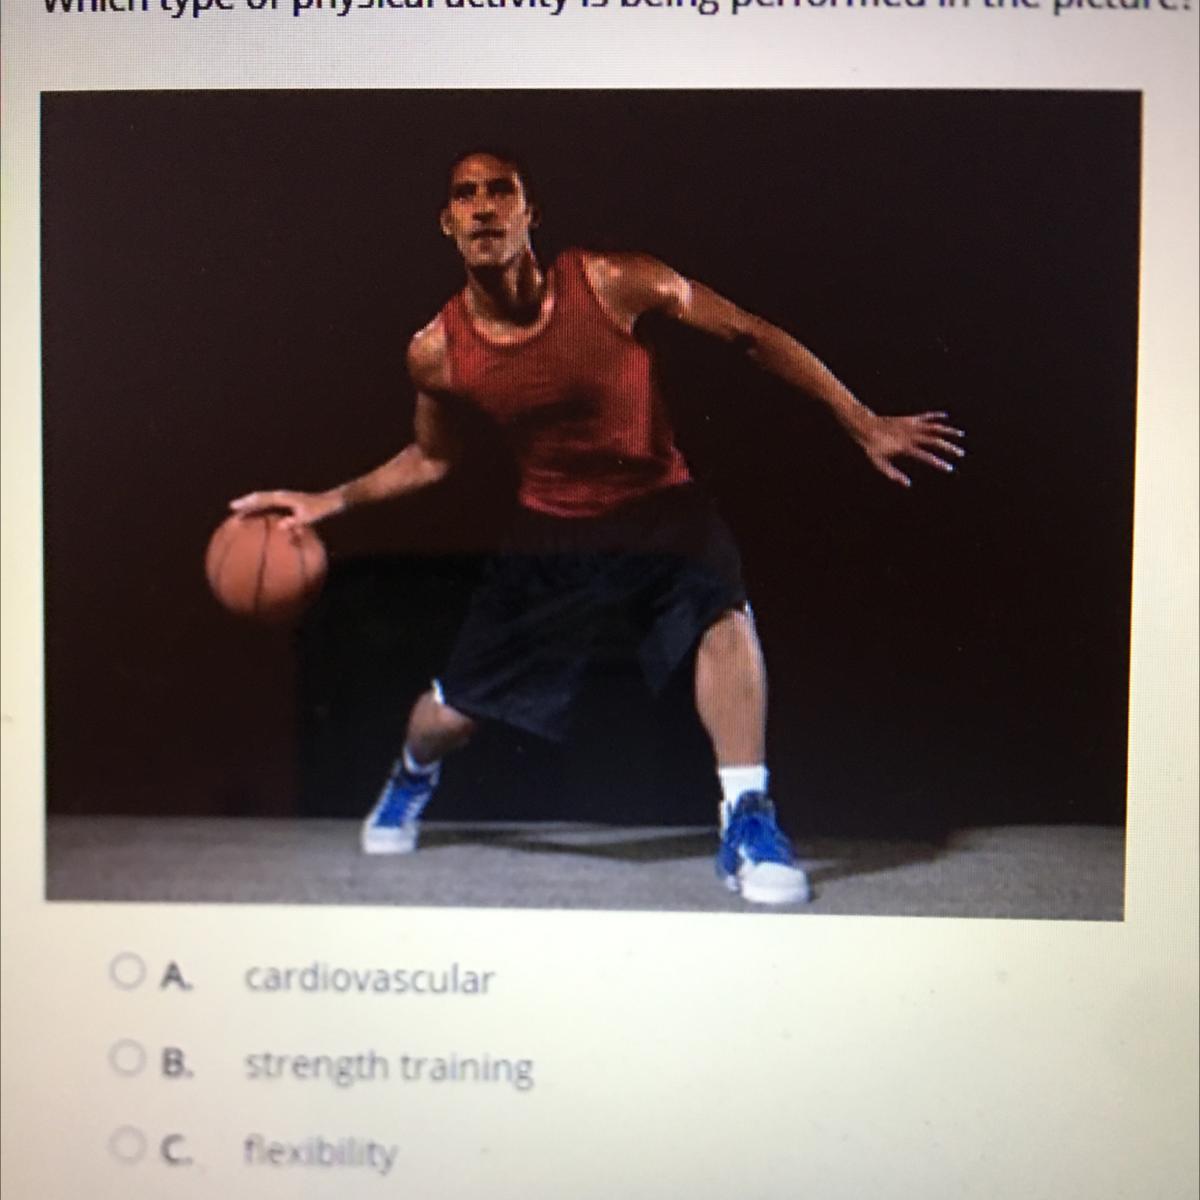 Which Type Of Physical Activity Is Being Performed In The Picture?A. CardiovascularB. Strength TrainingC.